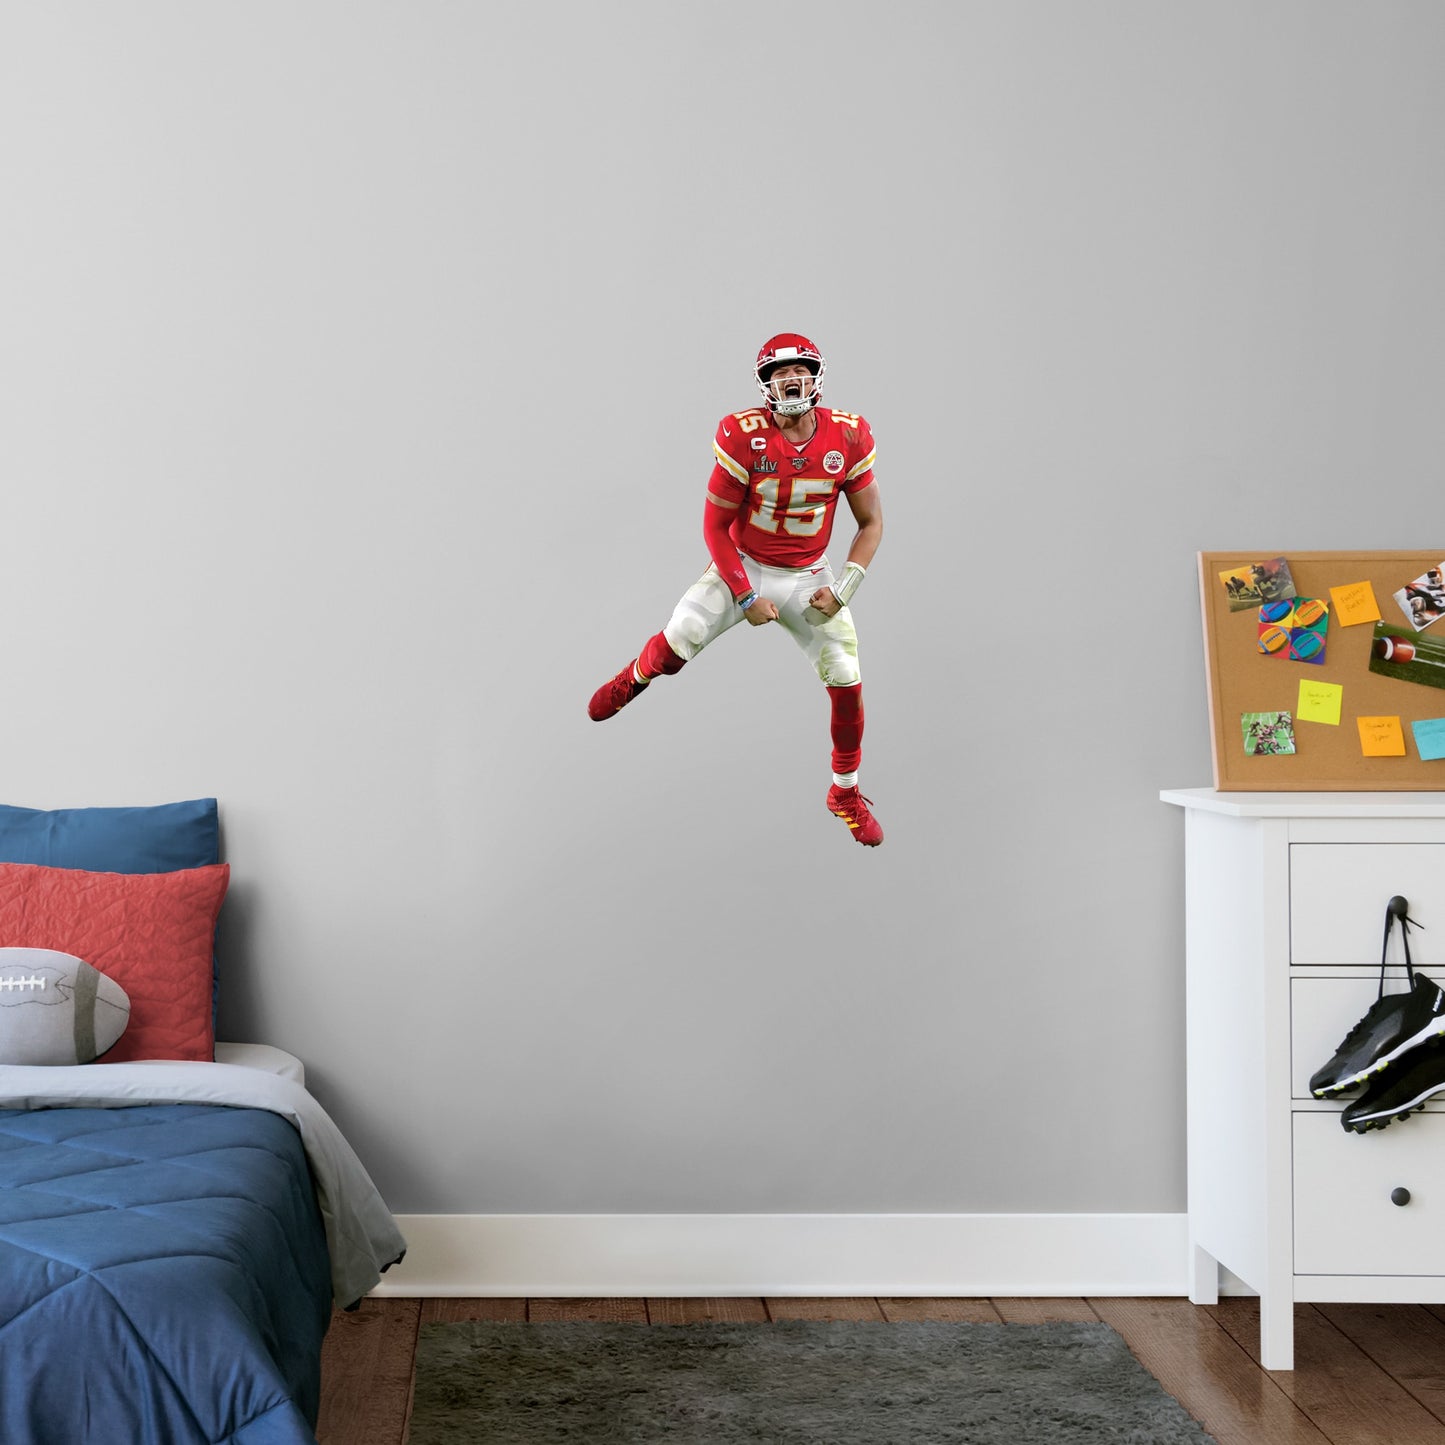 X-Large Athlete + 2 Decals (22"W x 38"H) Celebrate the Chiefs' epic Super Bowl LIV win over the 49ers with this high-quality, repositionable decal of MVP quarterback Patrick Mahomes celebrating the victory. Featuring plenty of the Chiefs' red and gold, this enthusiastic Magic Mahomes decal will brighten every day of your week. It's perfect for dorms, bedrooms, and sports bars because this durable, reusable Mahomes decal only damages the competition, not your walls.